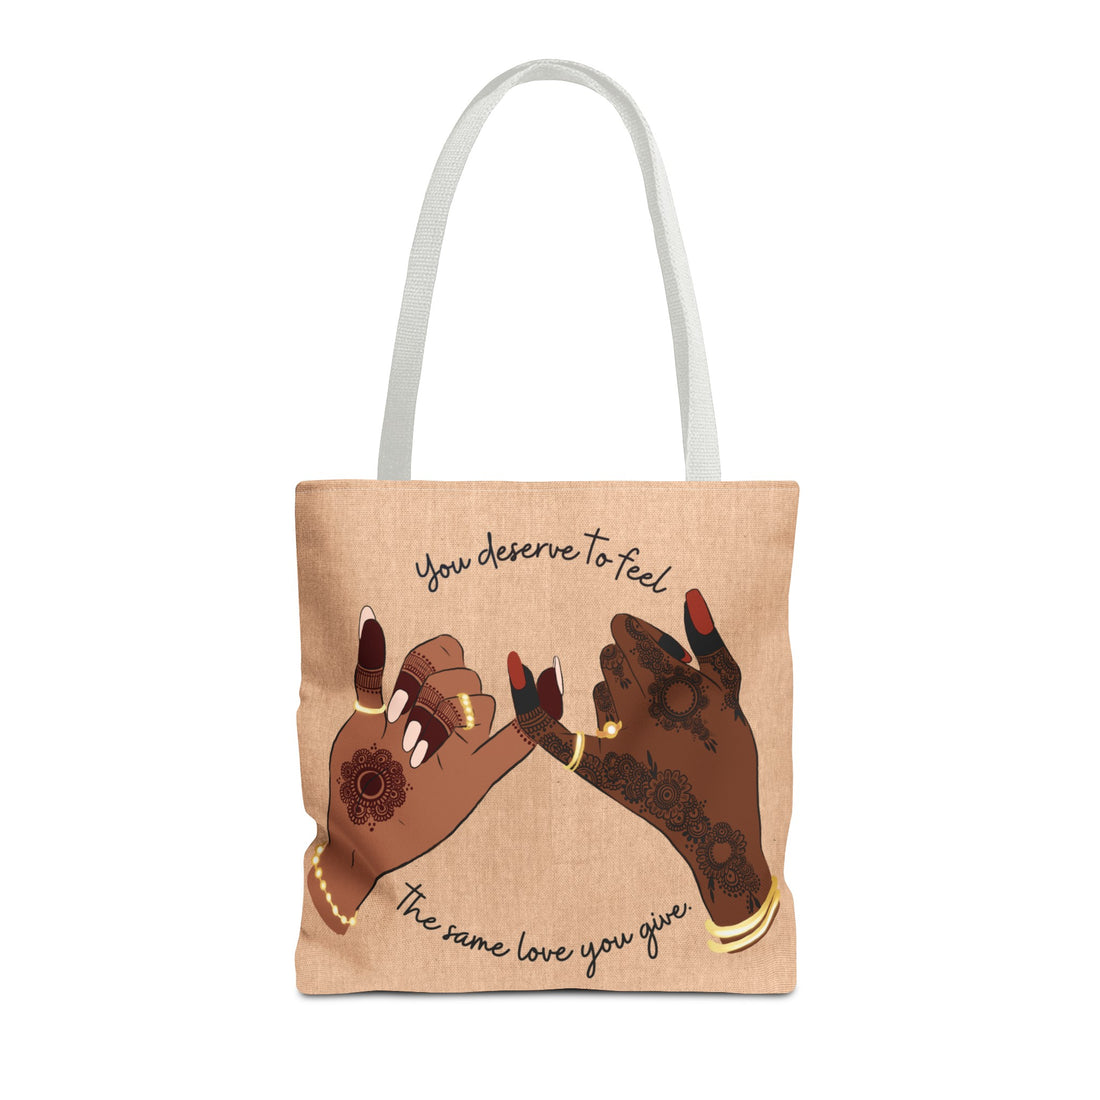 You Deserve to Feel the Same Love You Give - Tote Bag